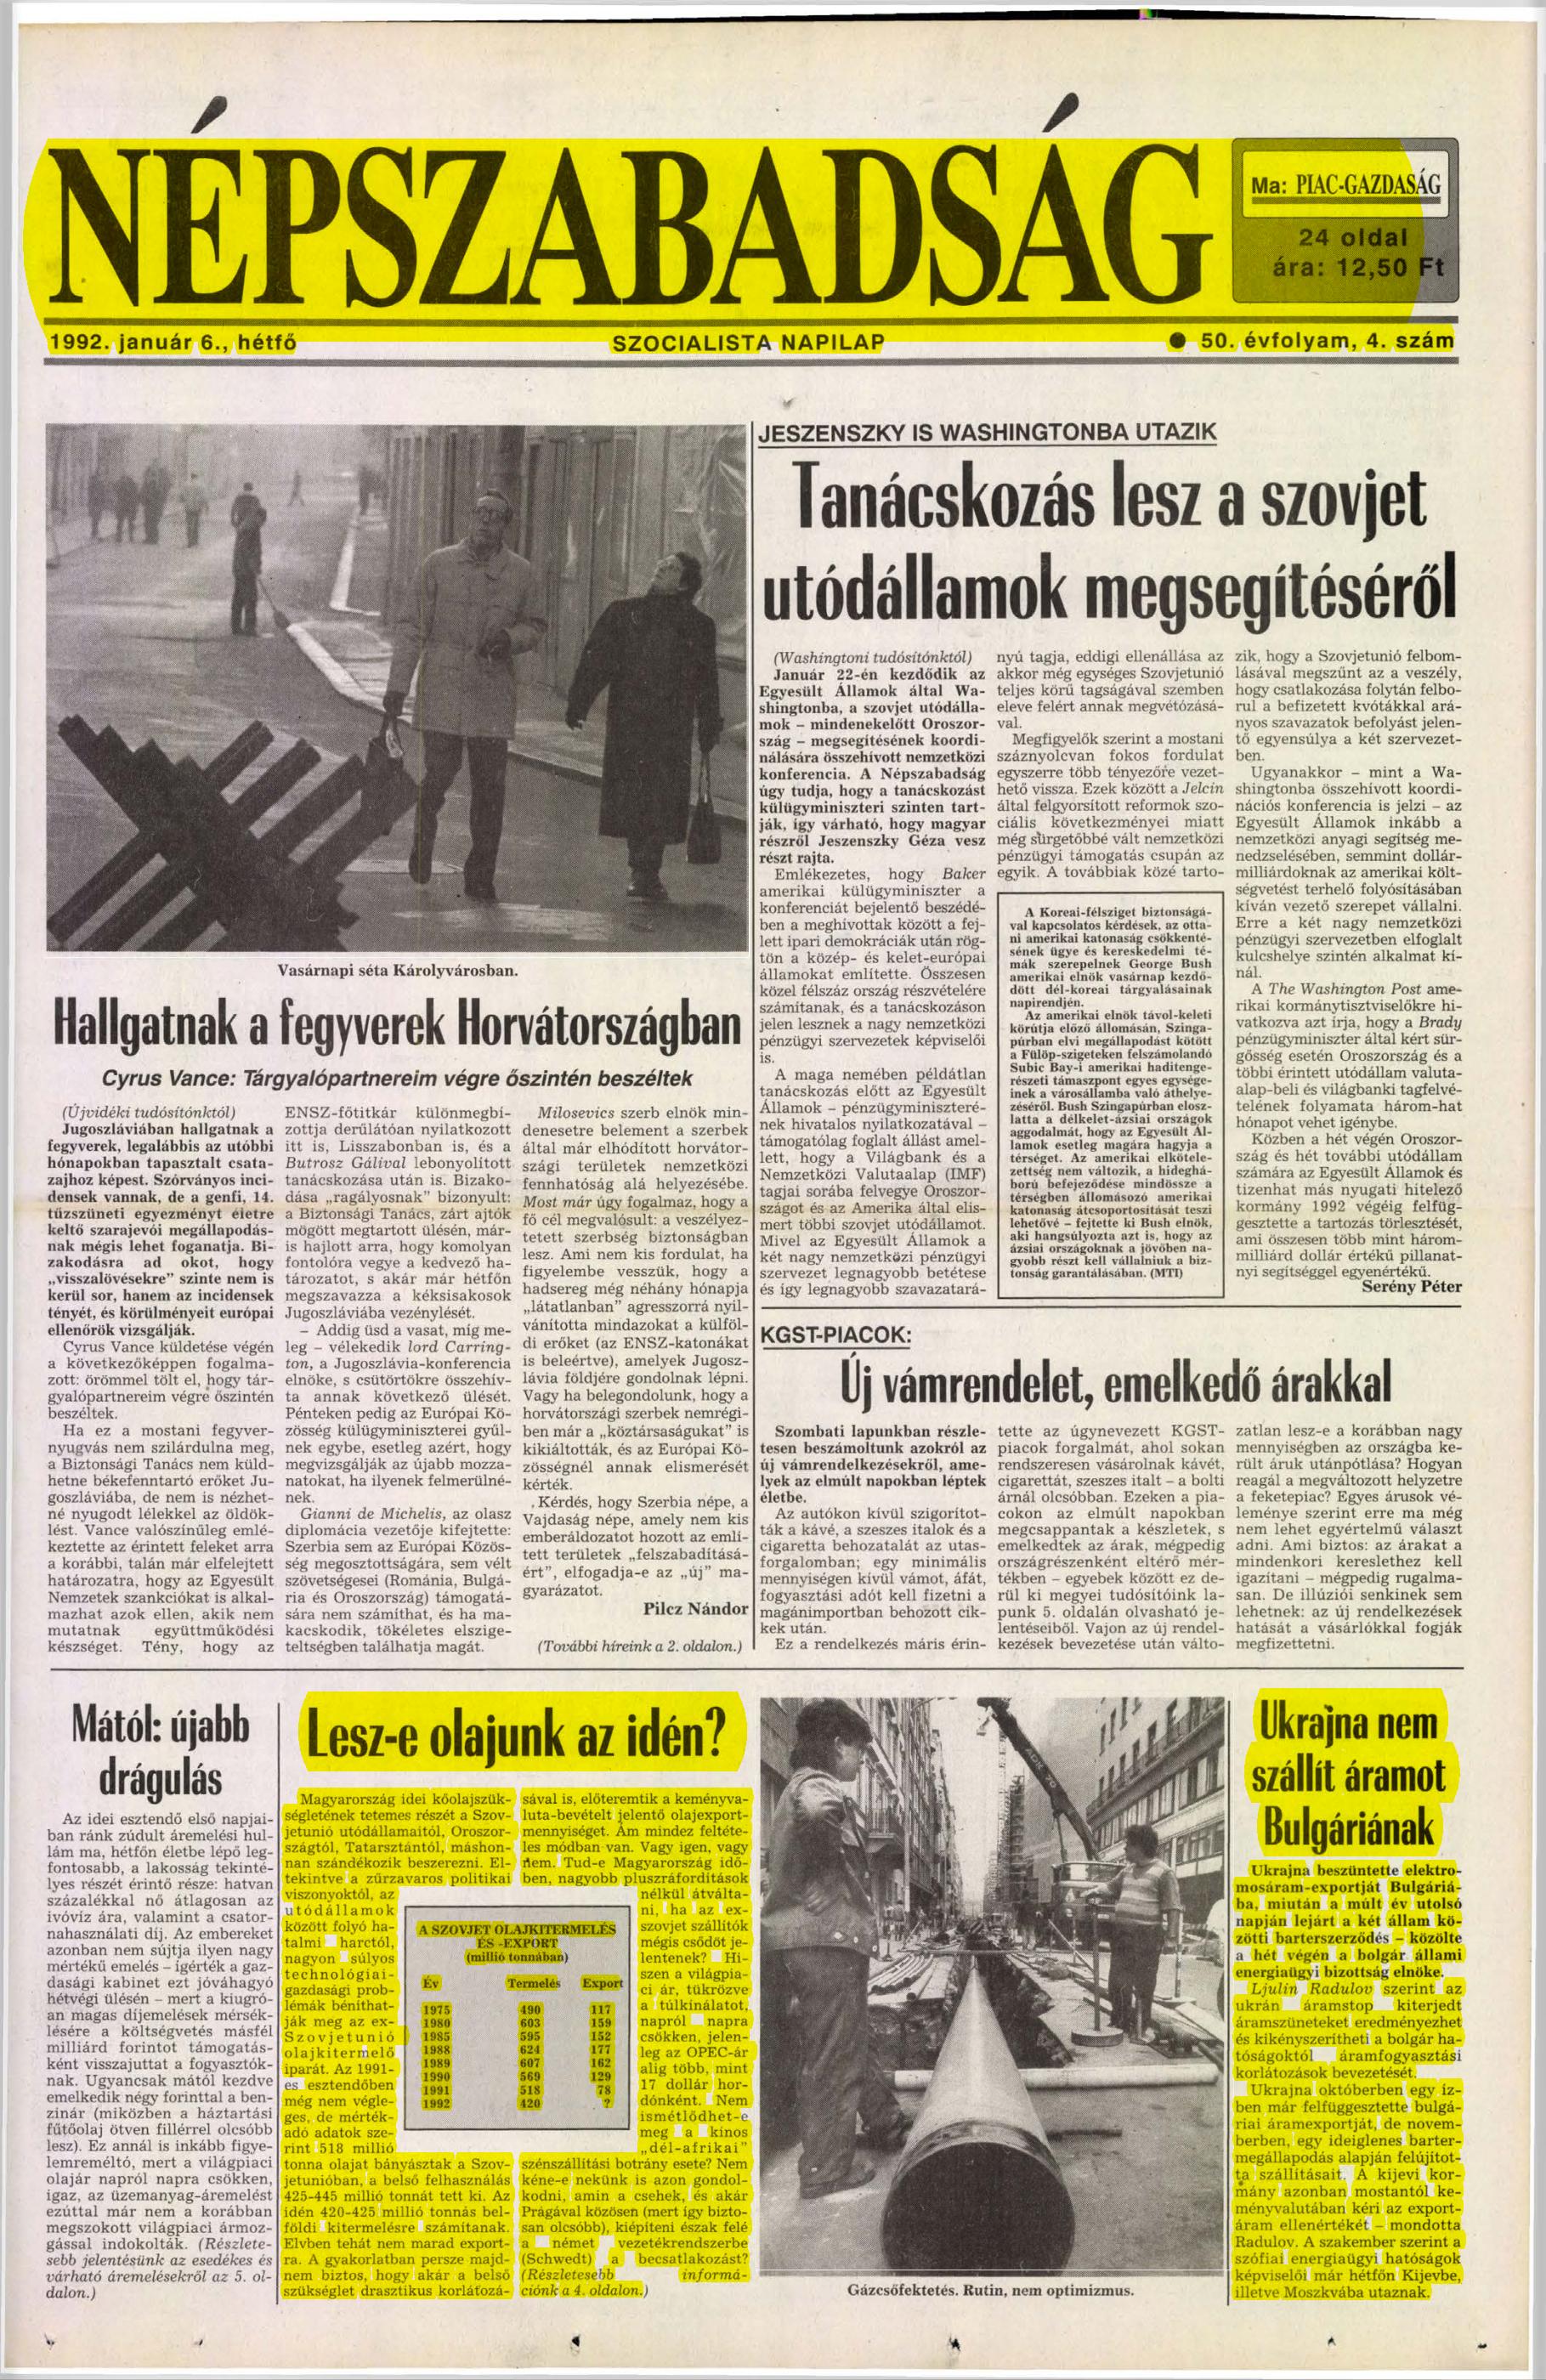 nepszabadsag_1992_01_pages64-64-page-001.jpg